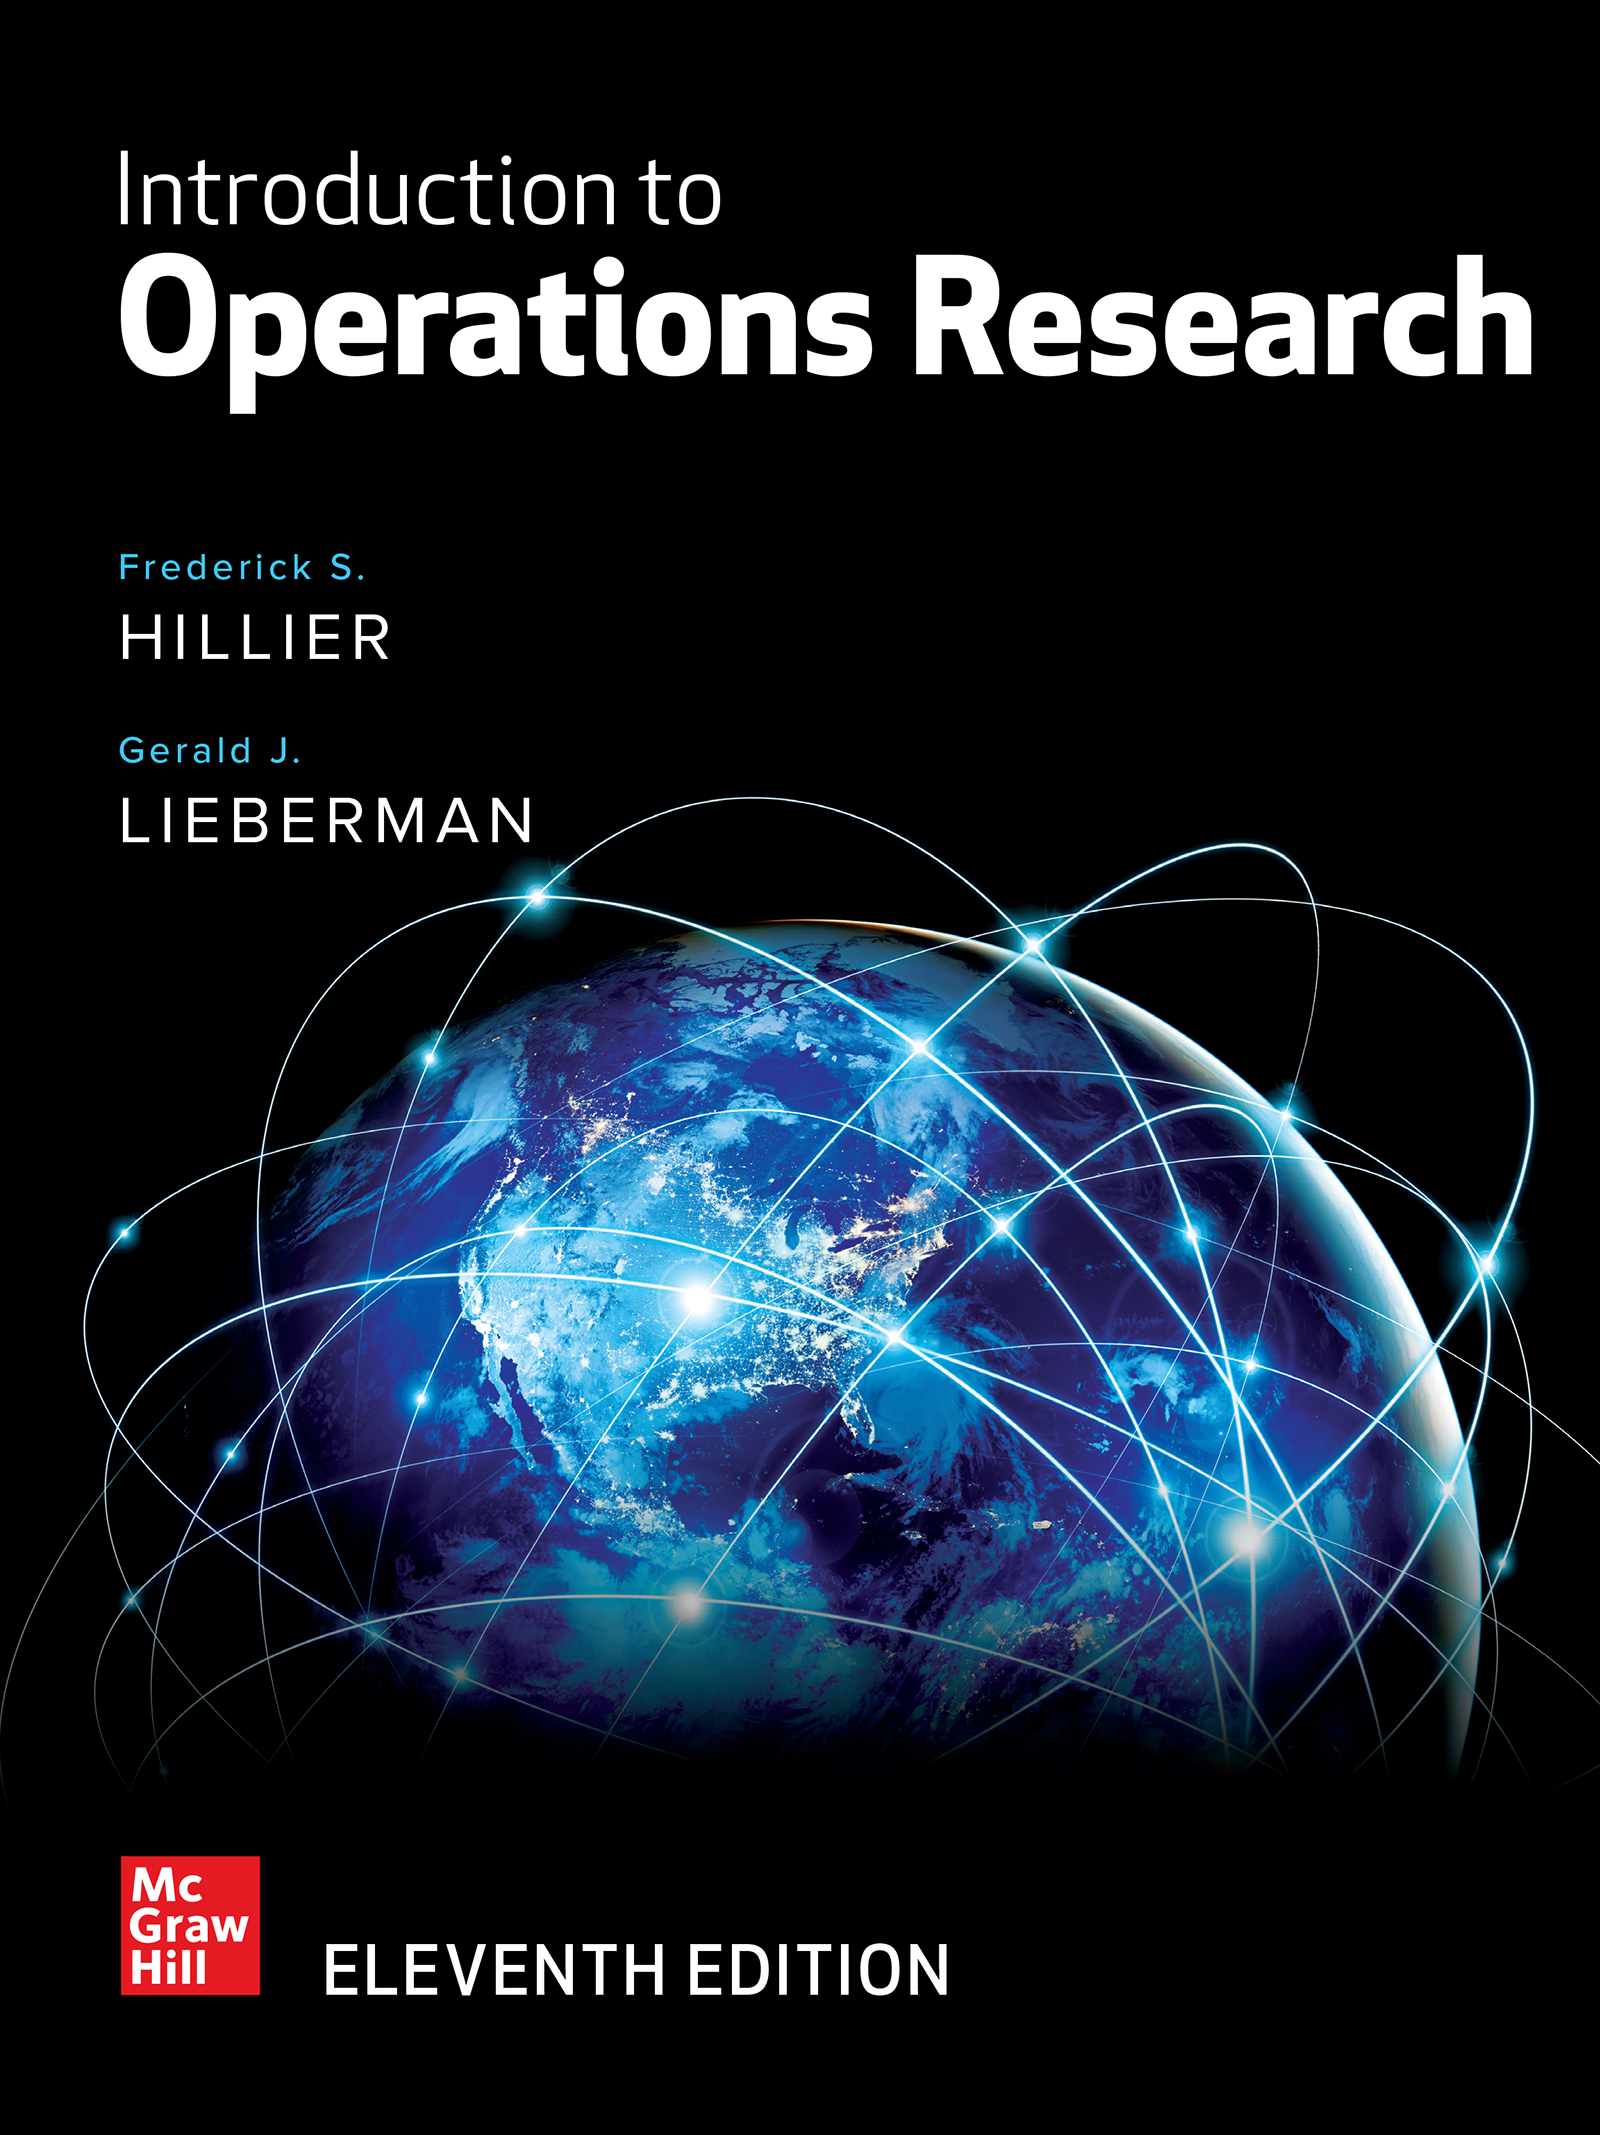 references of operation research